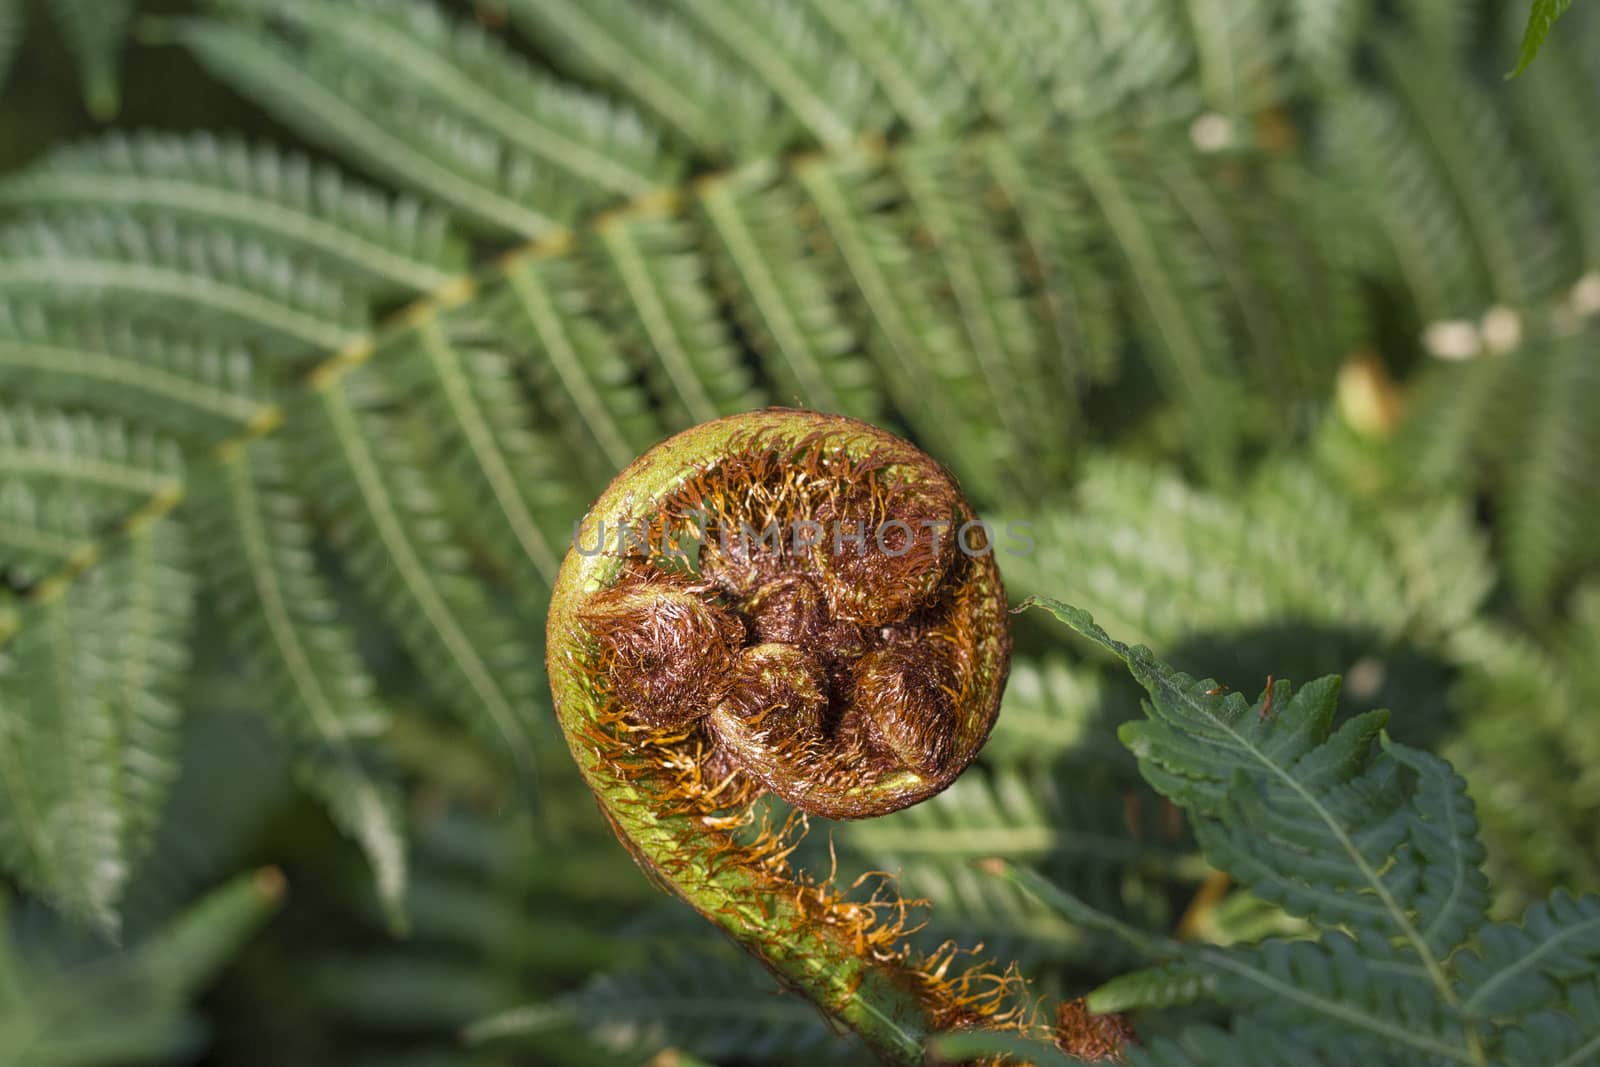 A young fern uncurling.